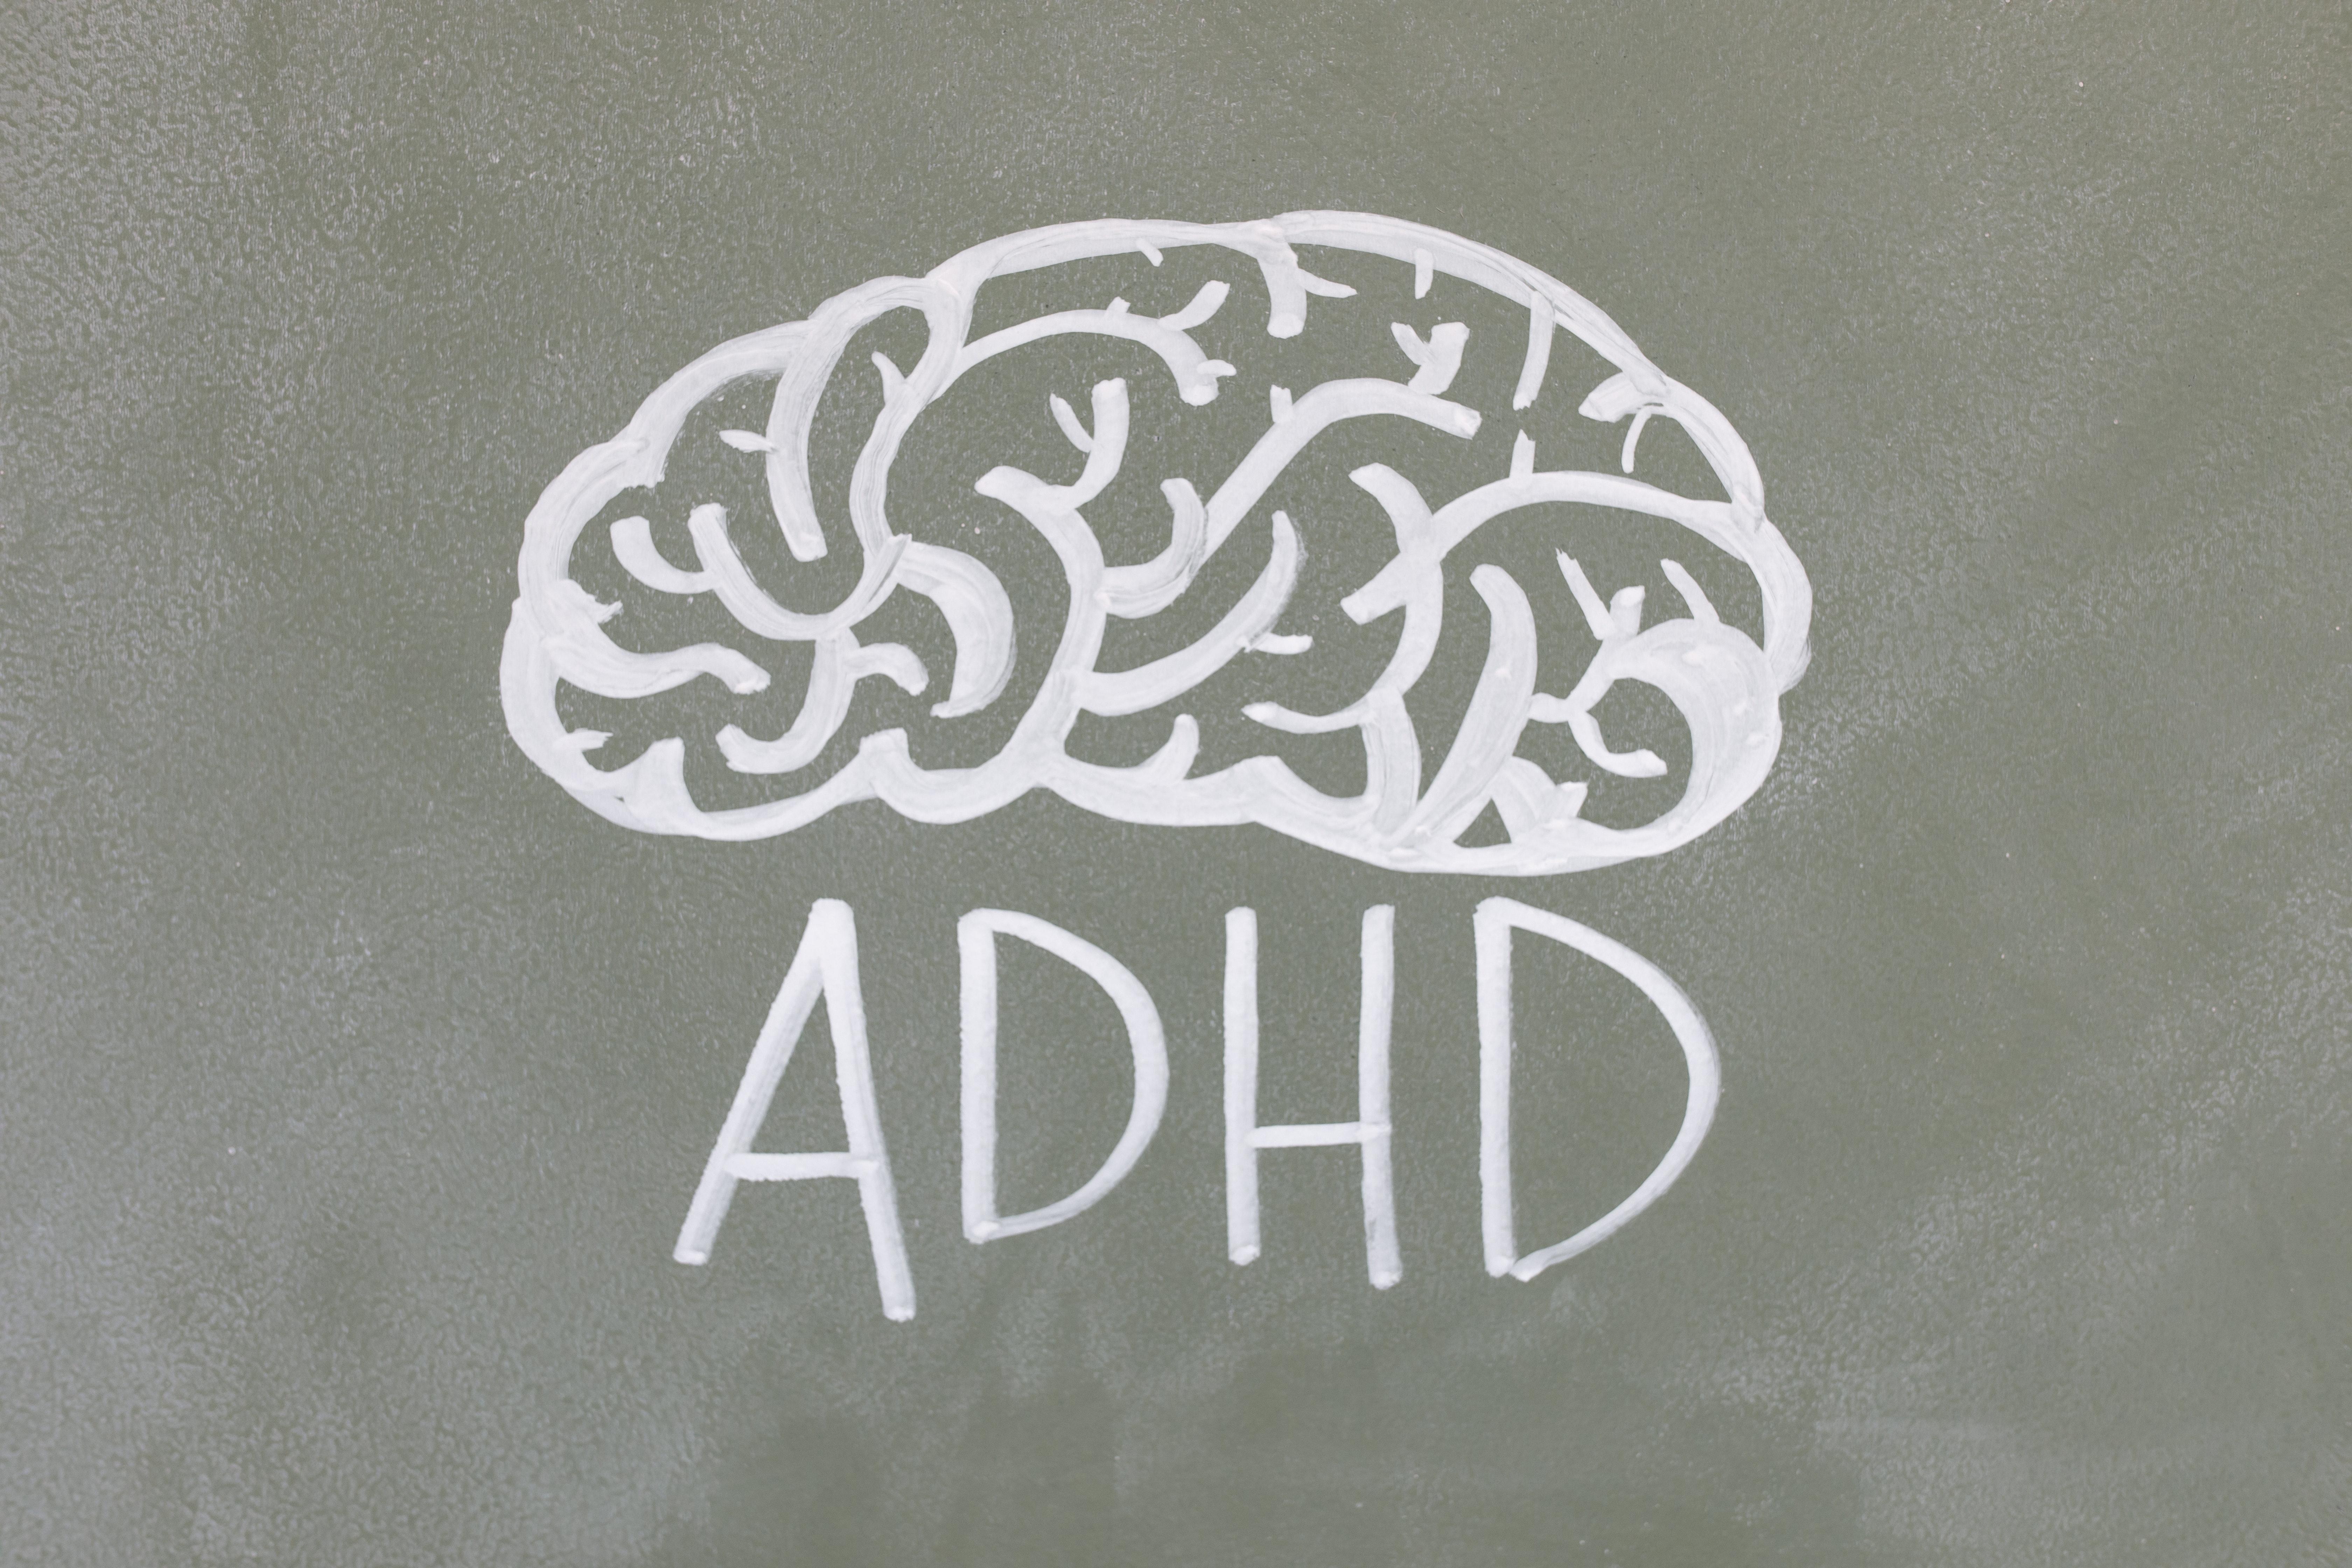 Debunking the Myth: Who can diagnose ADHD?